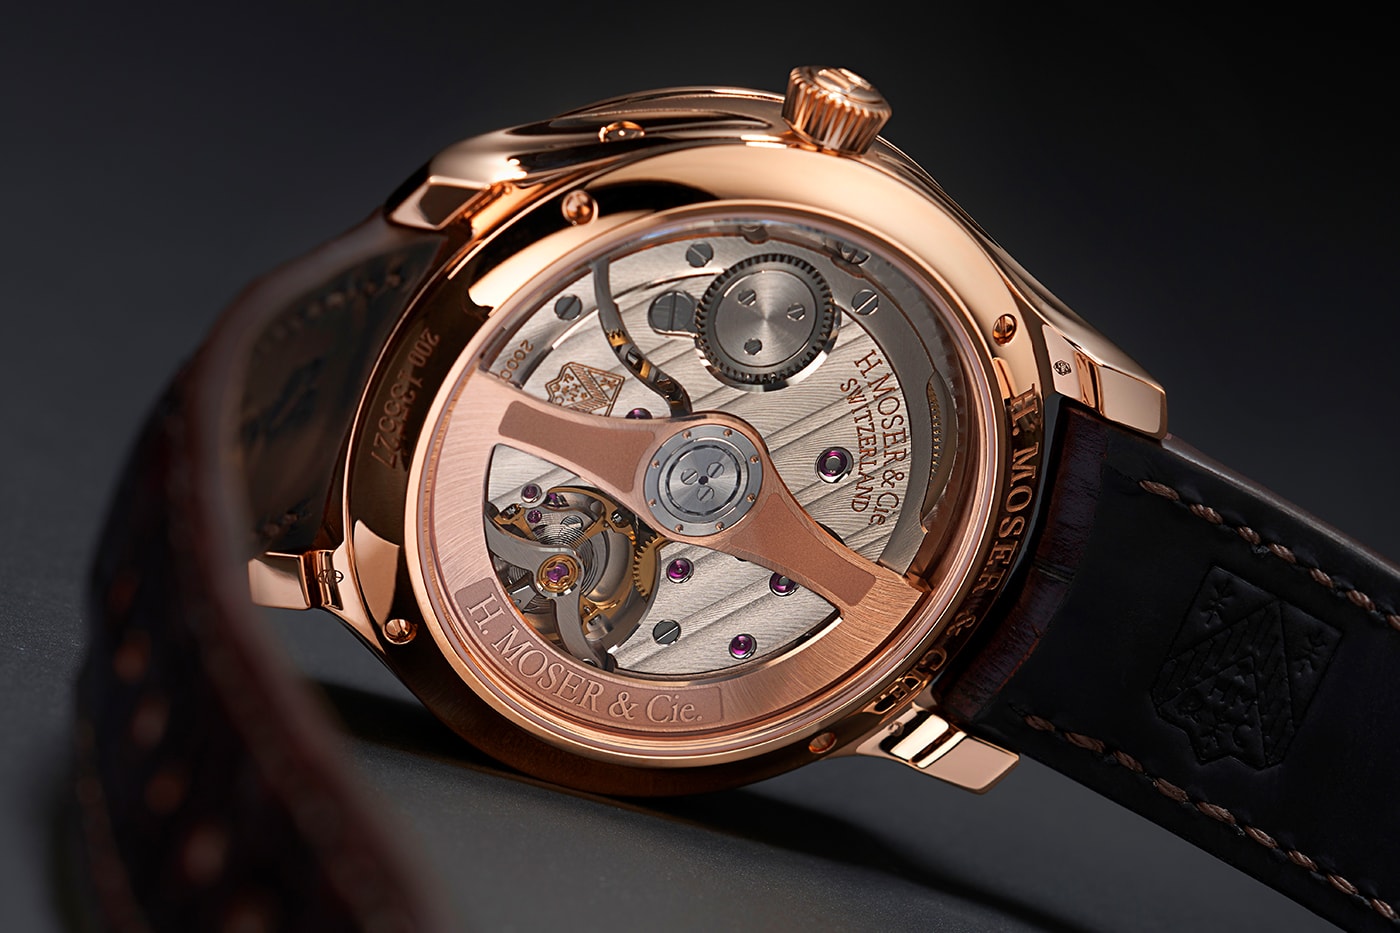  H. Moser Endeavour Chinese Calendar Limited Edition Release Info